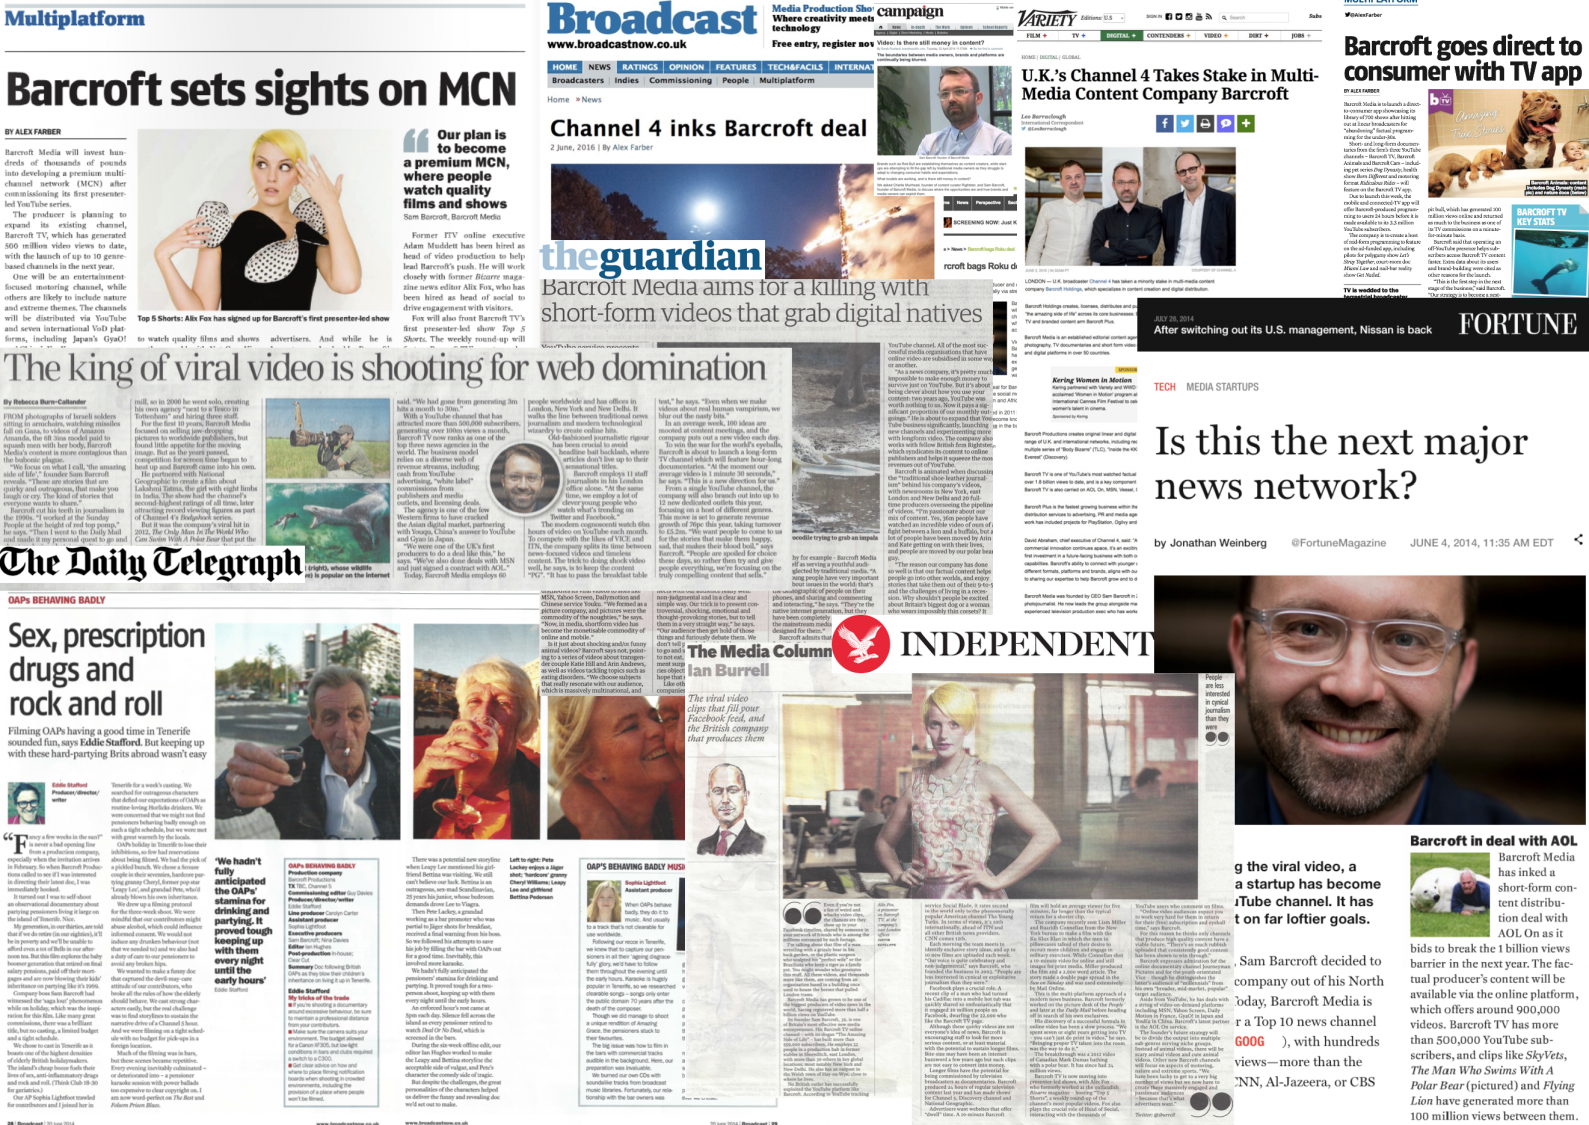 A small sample of coverage generated for Barcroft Media in target media